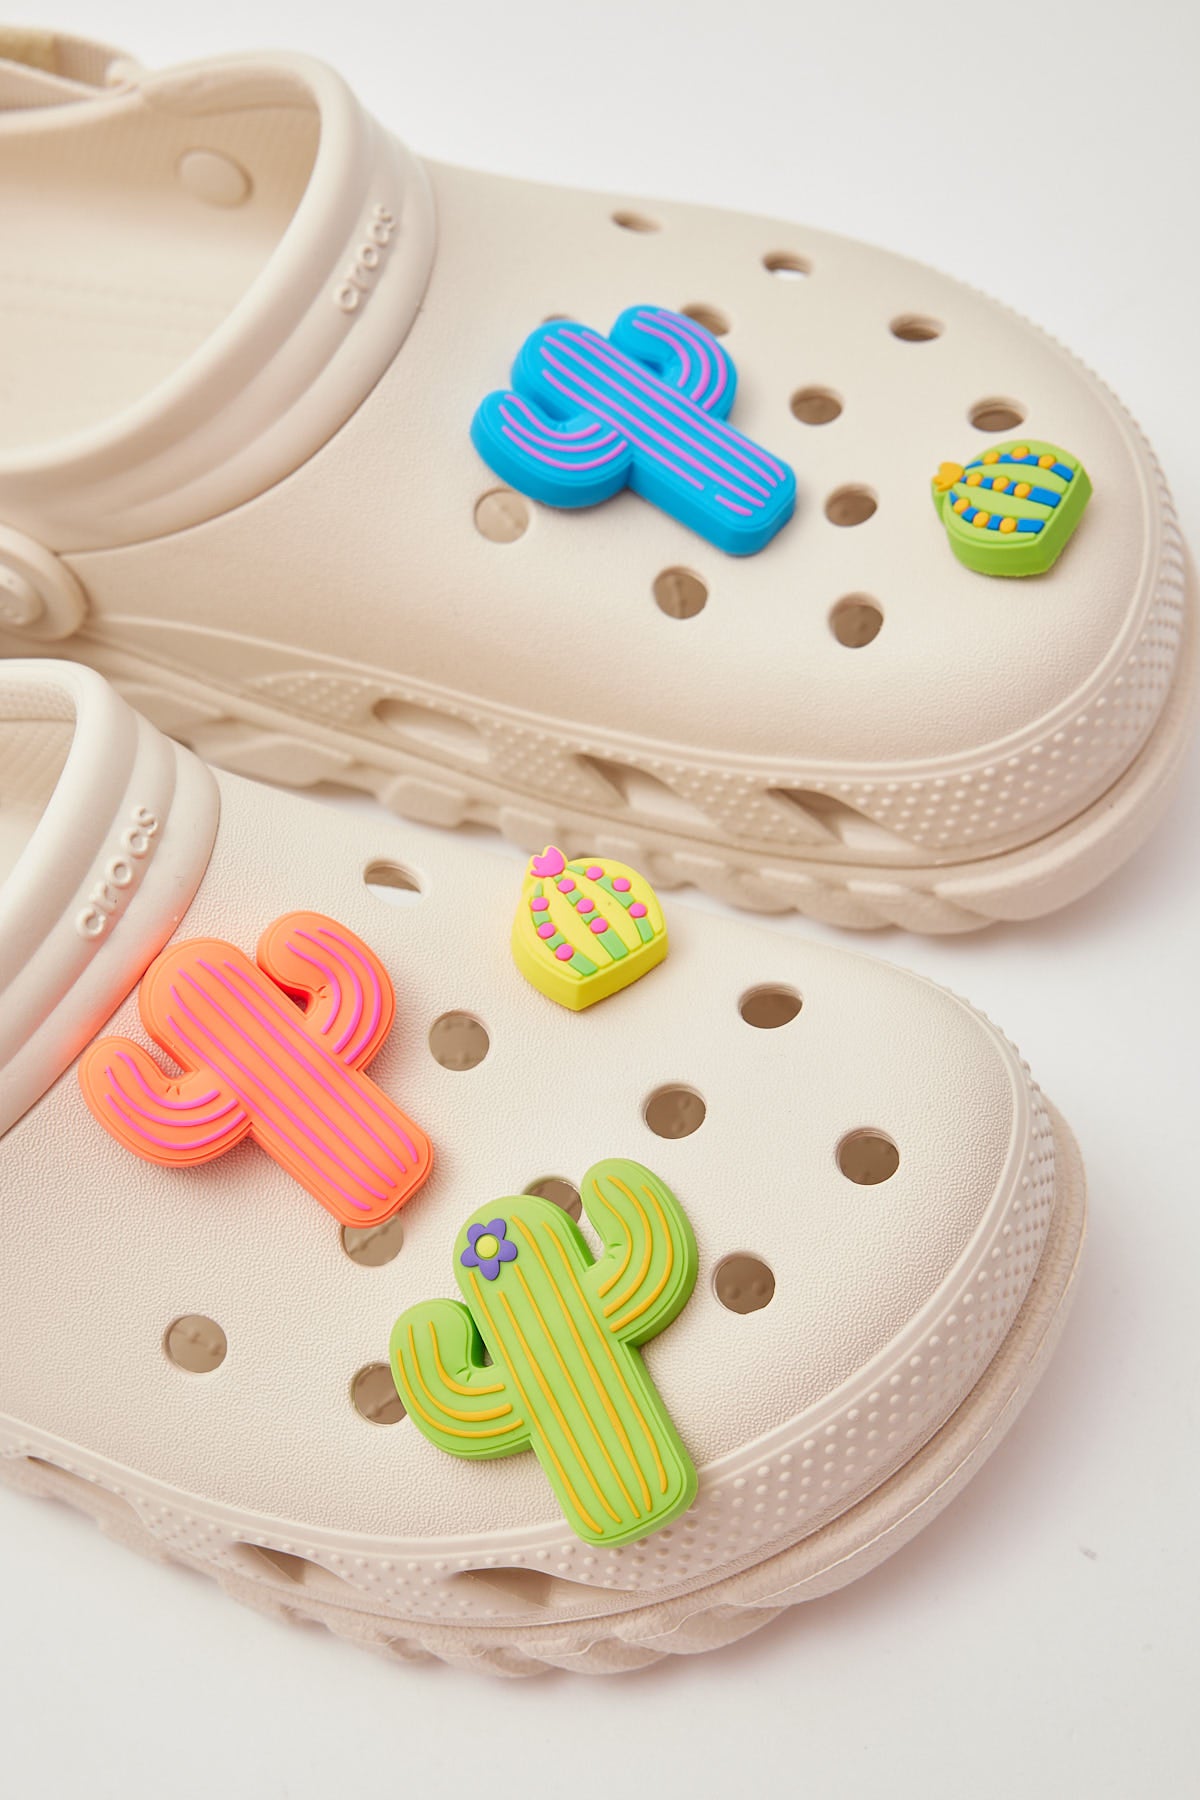 Crocs Charms for sale in Casuarina, Northern Territory